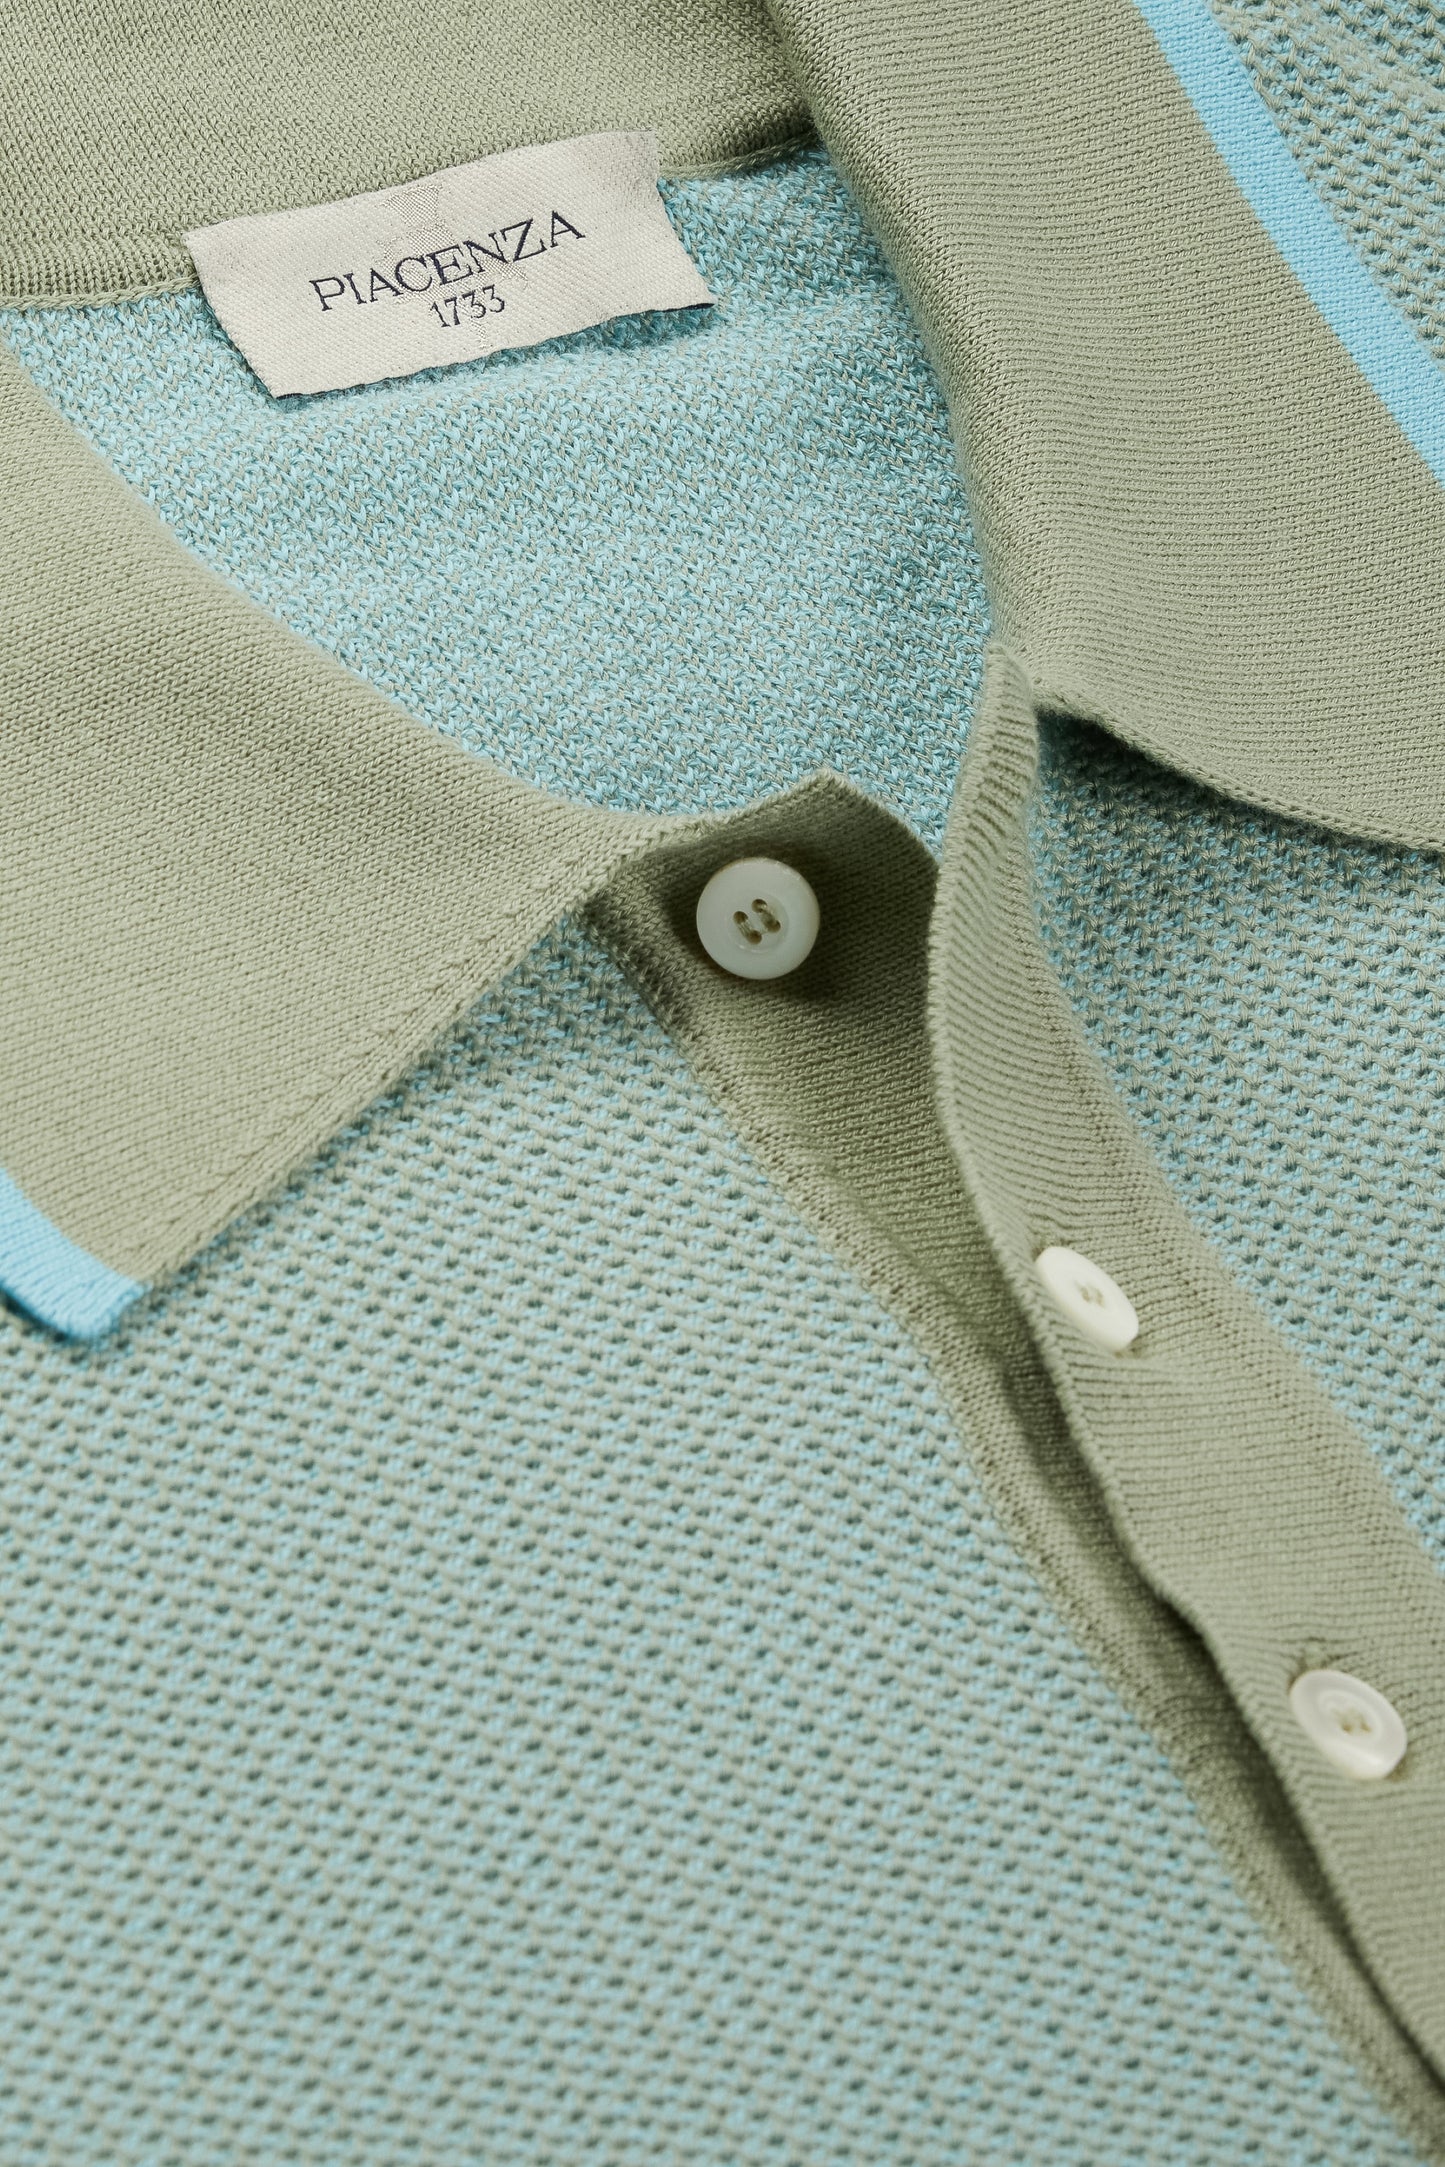 Two tone fish scale polo shirt in light blue and sage